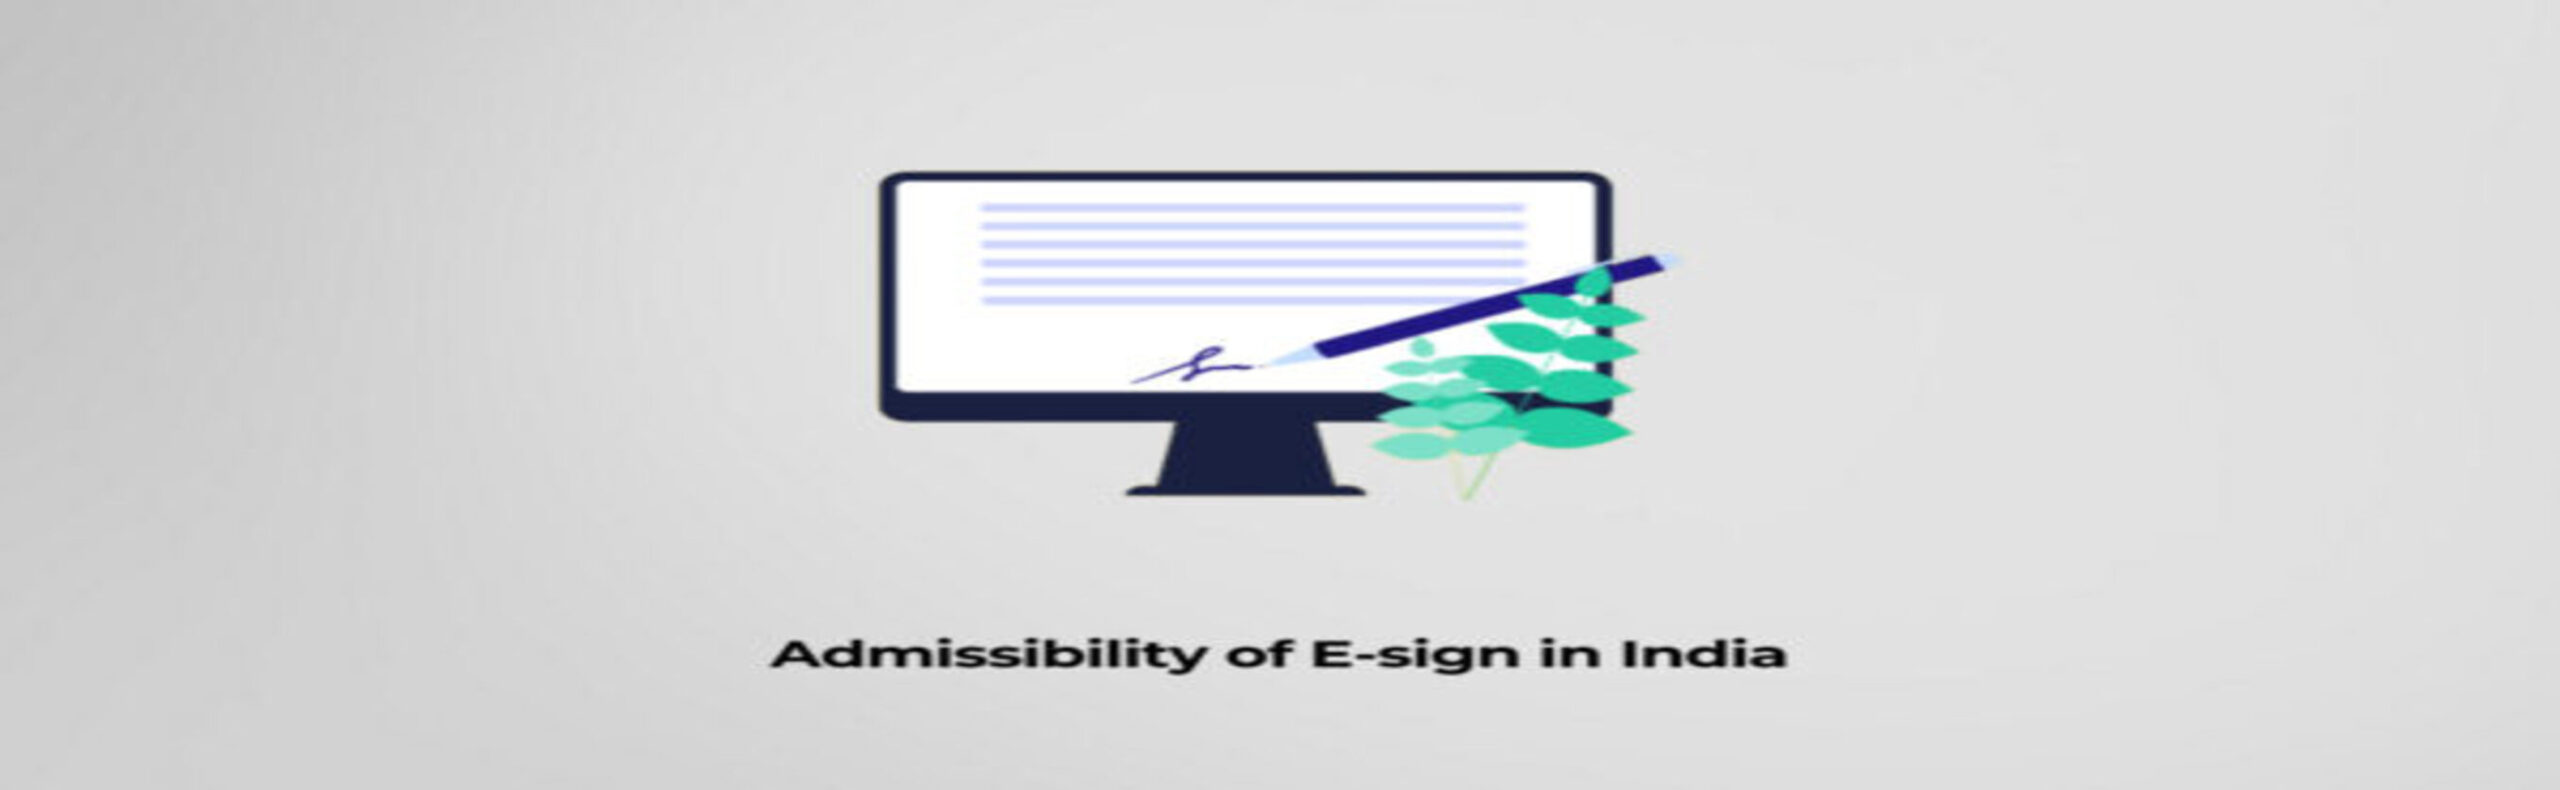 Admissibility of E-sign in India